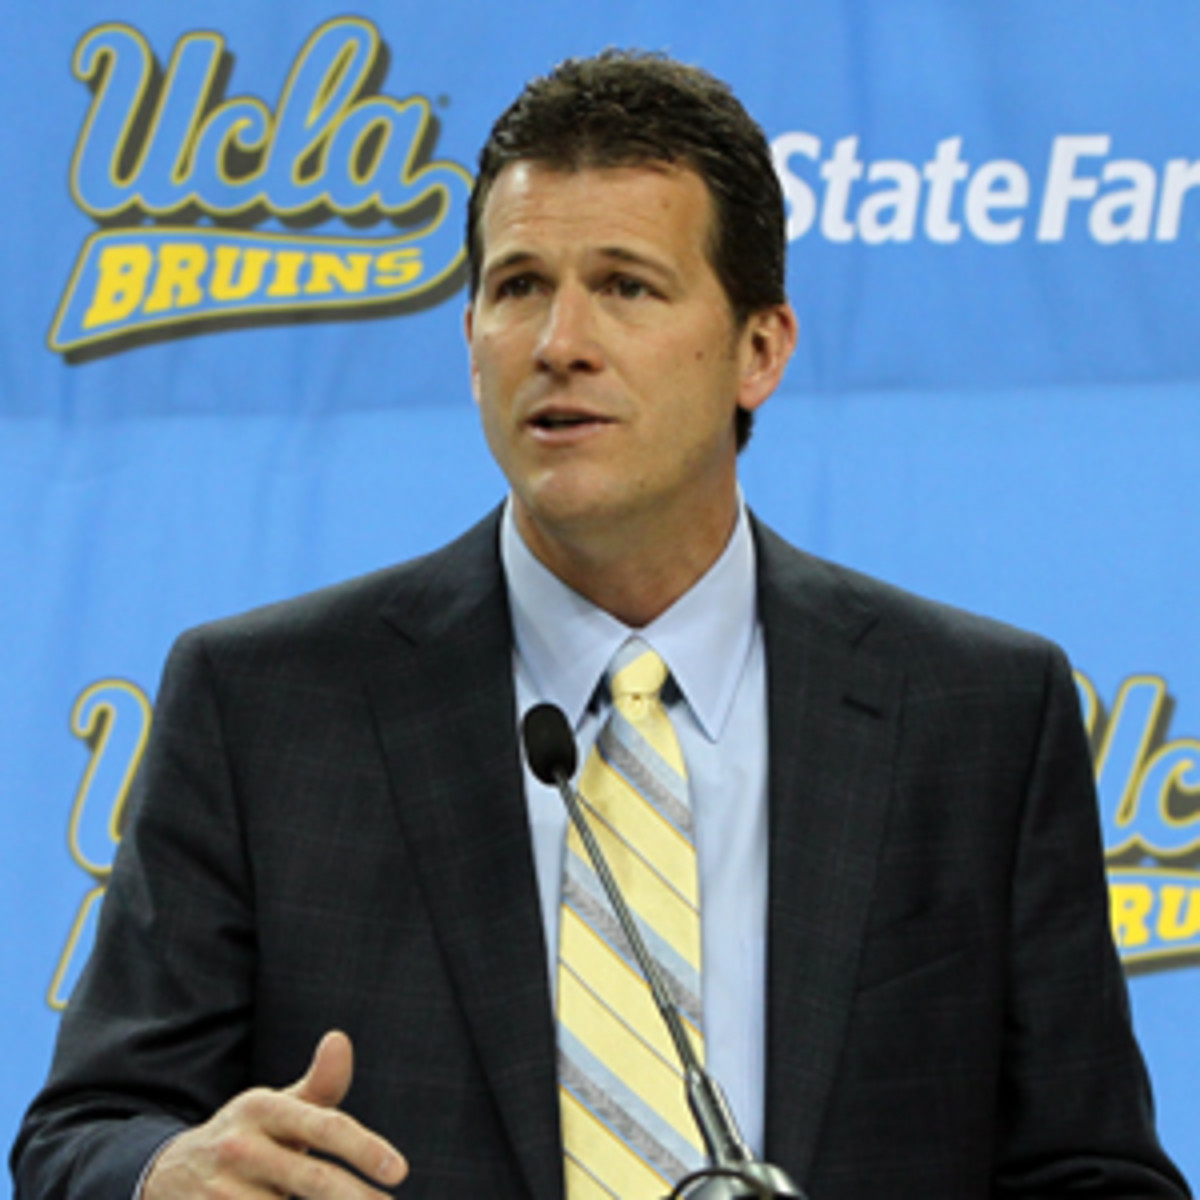 Steve Alford fell out of favor with Iowa boosters for his handling of the Pierre Pierce sexual assault case. (Victor Decolongon/Getty Images)